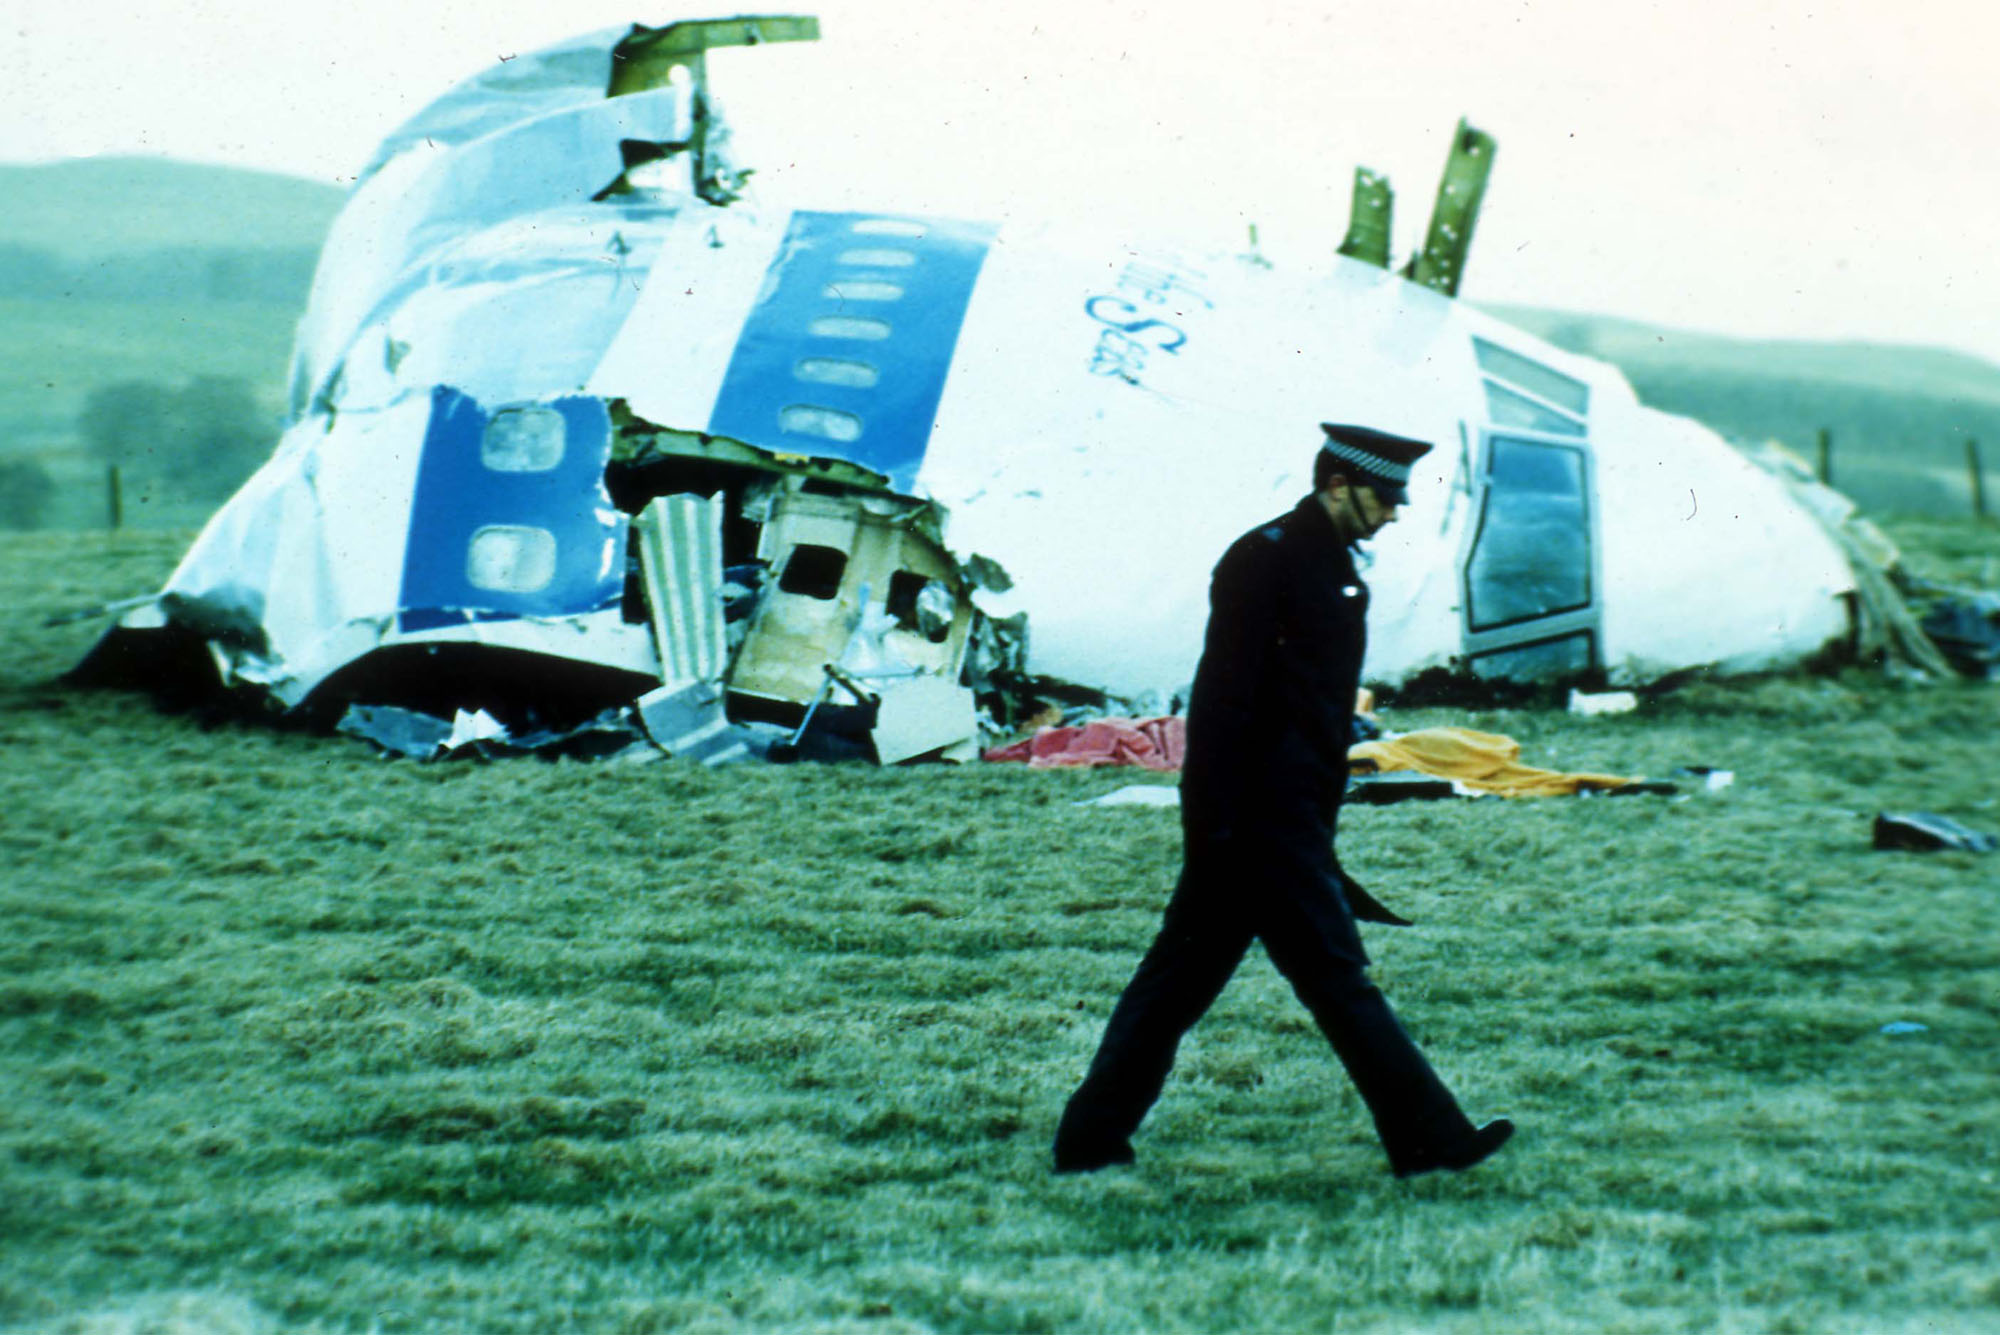 n this Dec. 1988 file photo, a police officer walks past the wreckage in Lockerbie, Scotland of Pan Am Flight 103 from London to New York. The Dec. 21, 1988 explosion would quickly transform the Scottish town into a byword for international terror. Now it is being remembered again because of the 2011 conflict in Libya, the country that accepted responsibility for blowing up Pan Am Flight 103. (AP Photo)